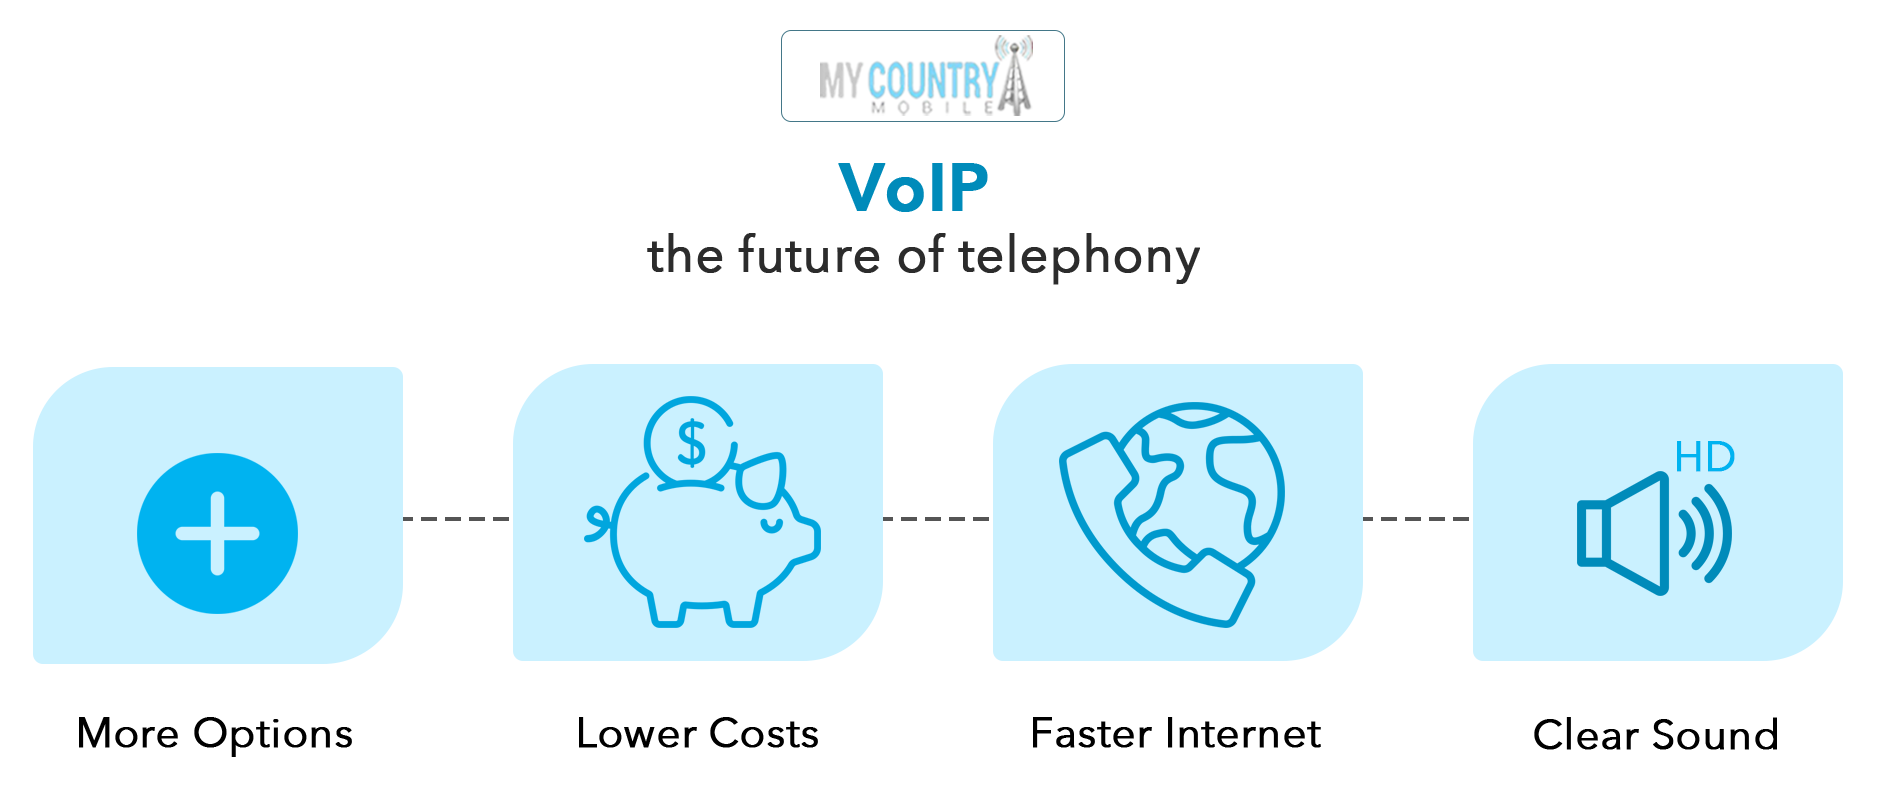  Comparing Benefits Voip to Disadvantages